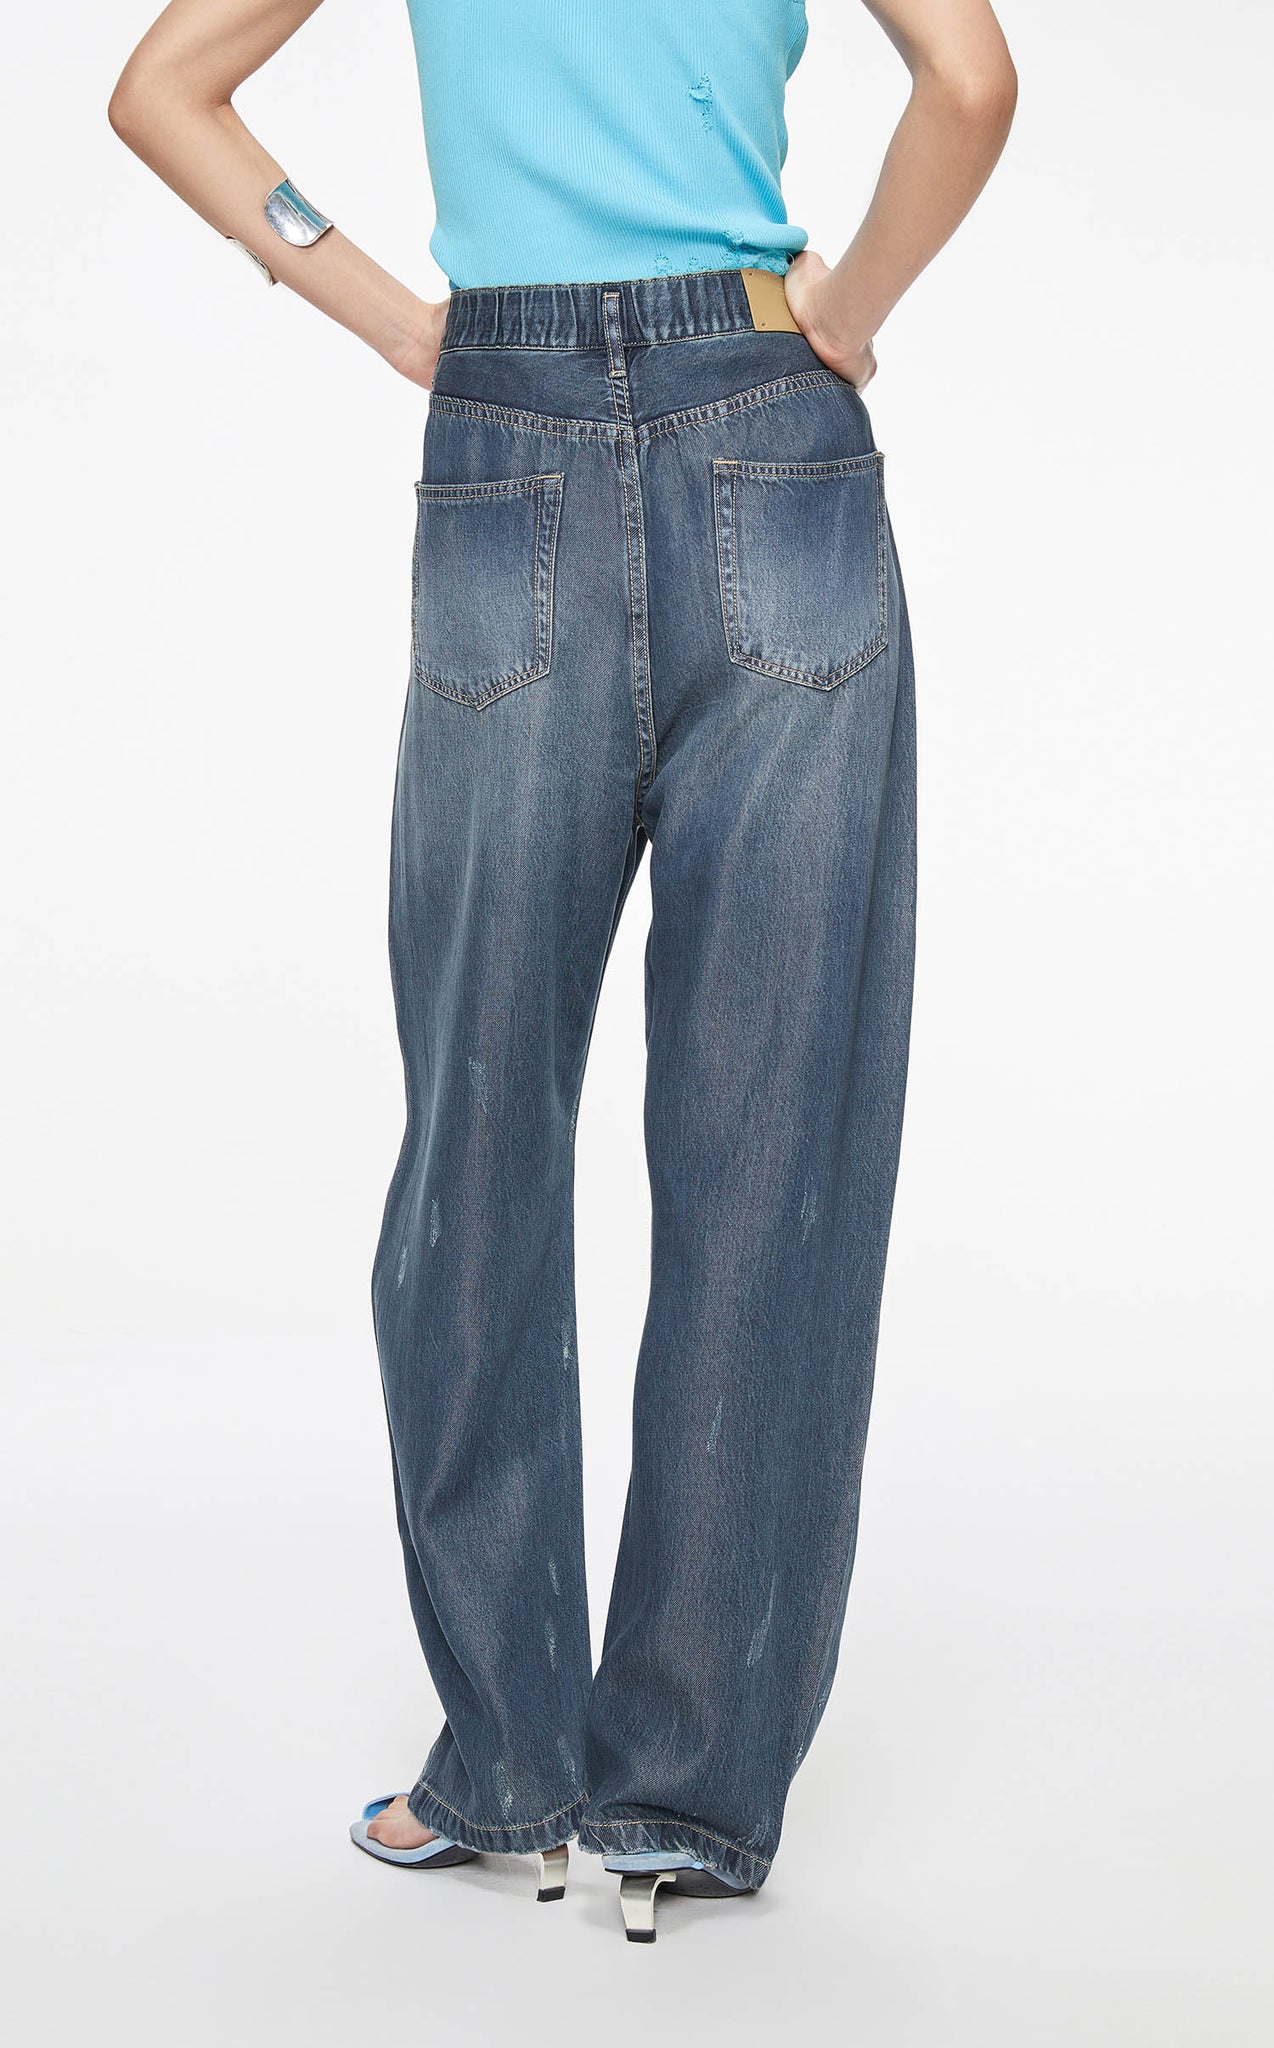 Jeans / JNBY Loose Fit Elasitcated Waist Washed Jeans